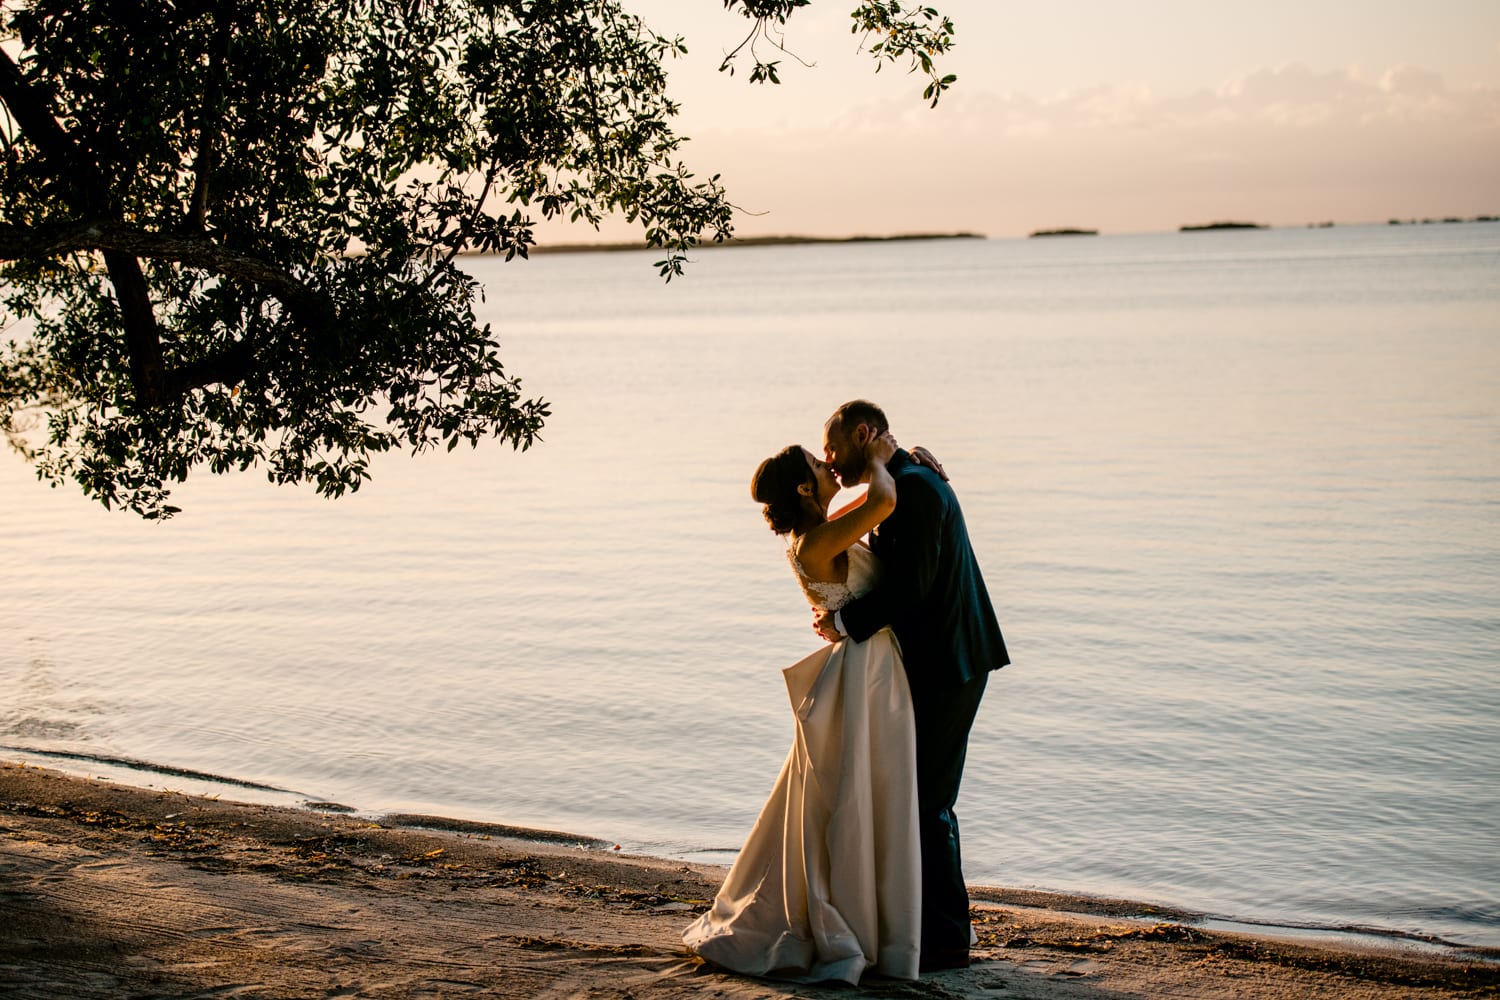 A wedding at Bakers Cay Resort with a sunset kiss by the water.